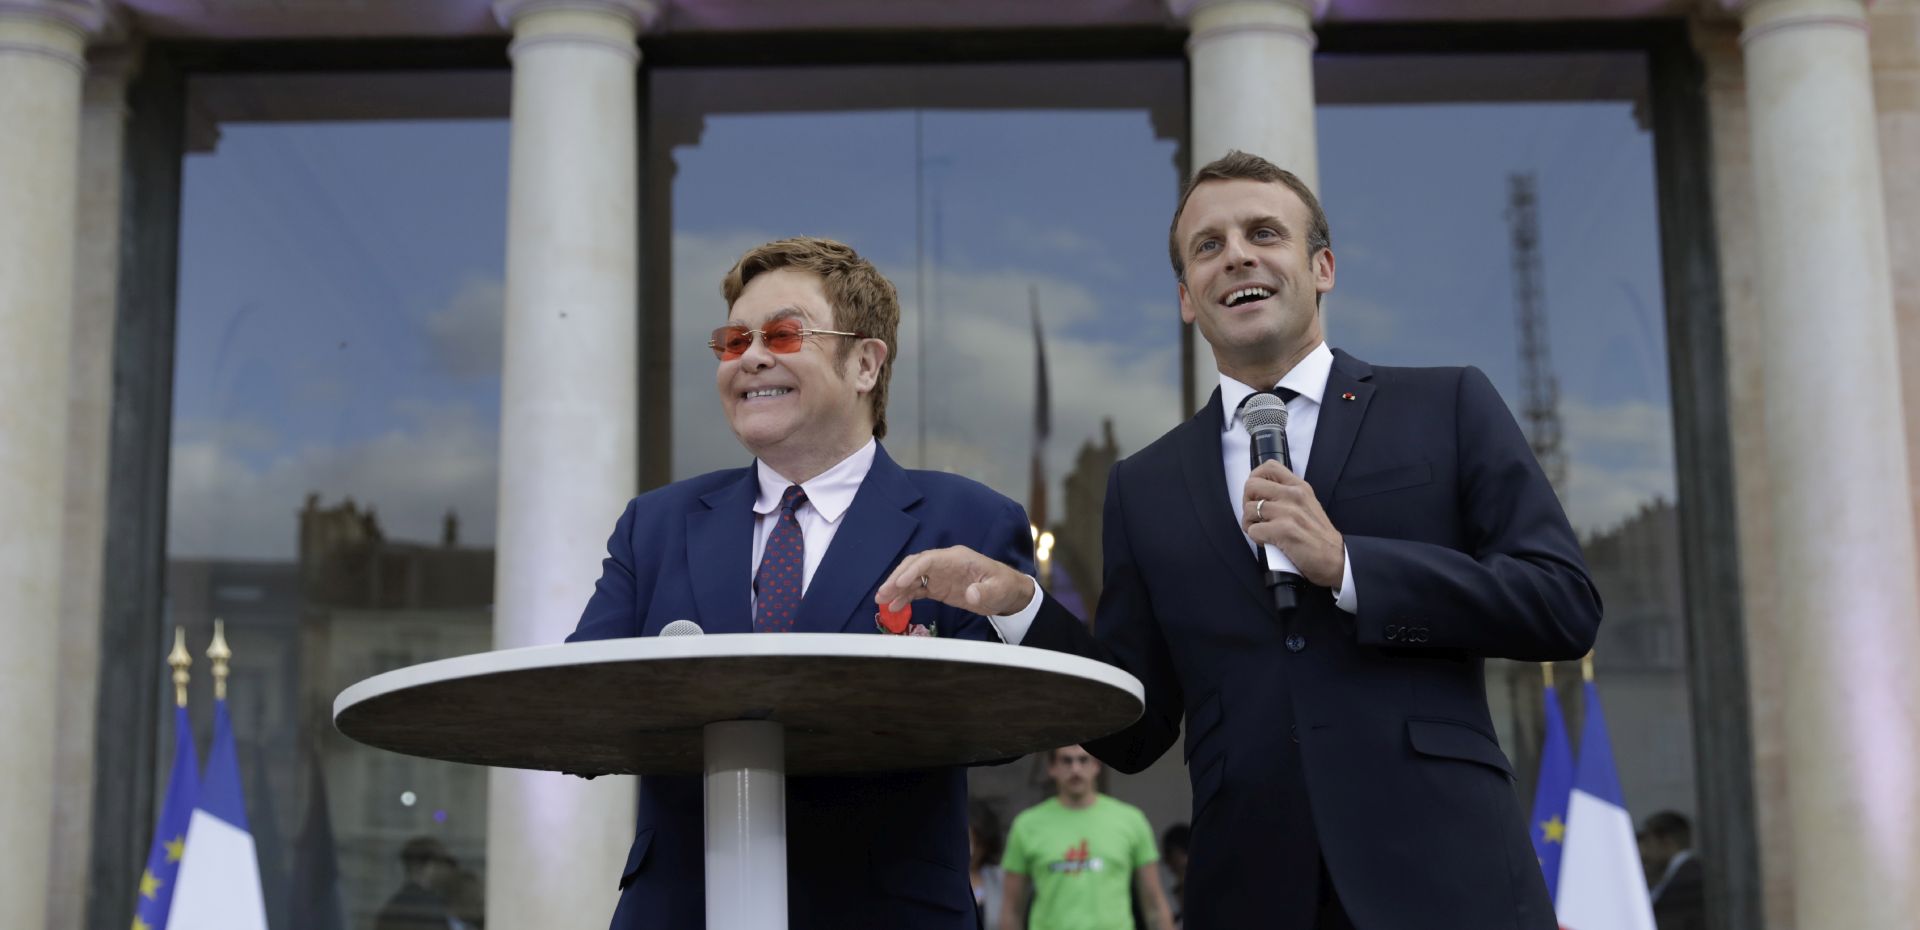 epa07664290 French President Emmanuel Macron, right, and Sir Elton John speak in the courtyard of the presidential Elysee Palace in Paris, France, 21 June 2019. Sir Elton John received the Legion of Honor, France's highest award, during a visit to the presidential Elysee Palace  EPA/Lewis Joly / POOL MAXPPP OUT